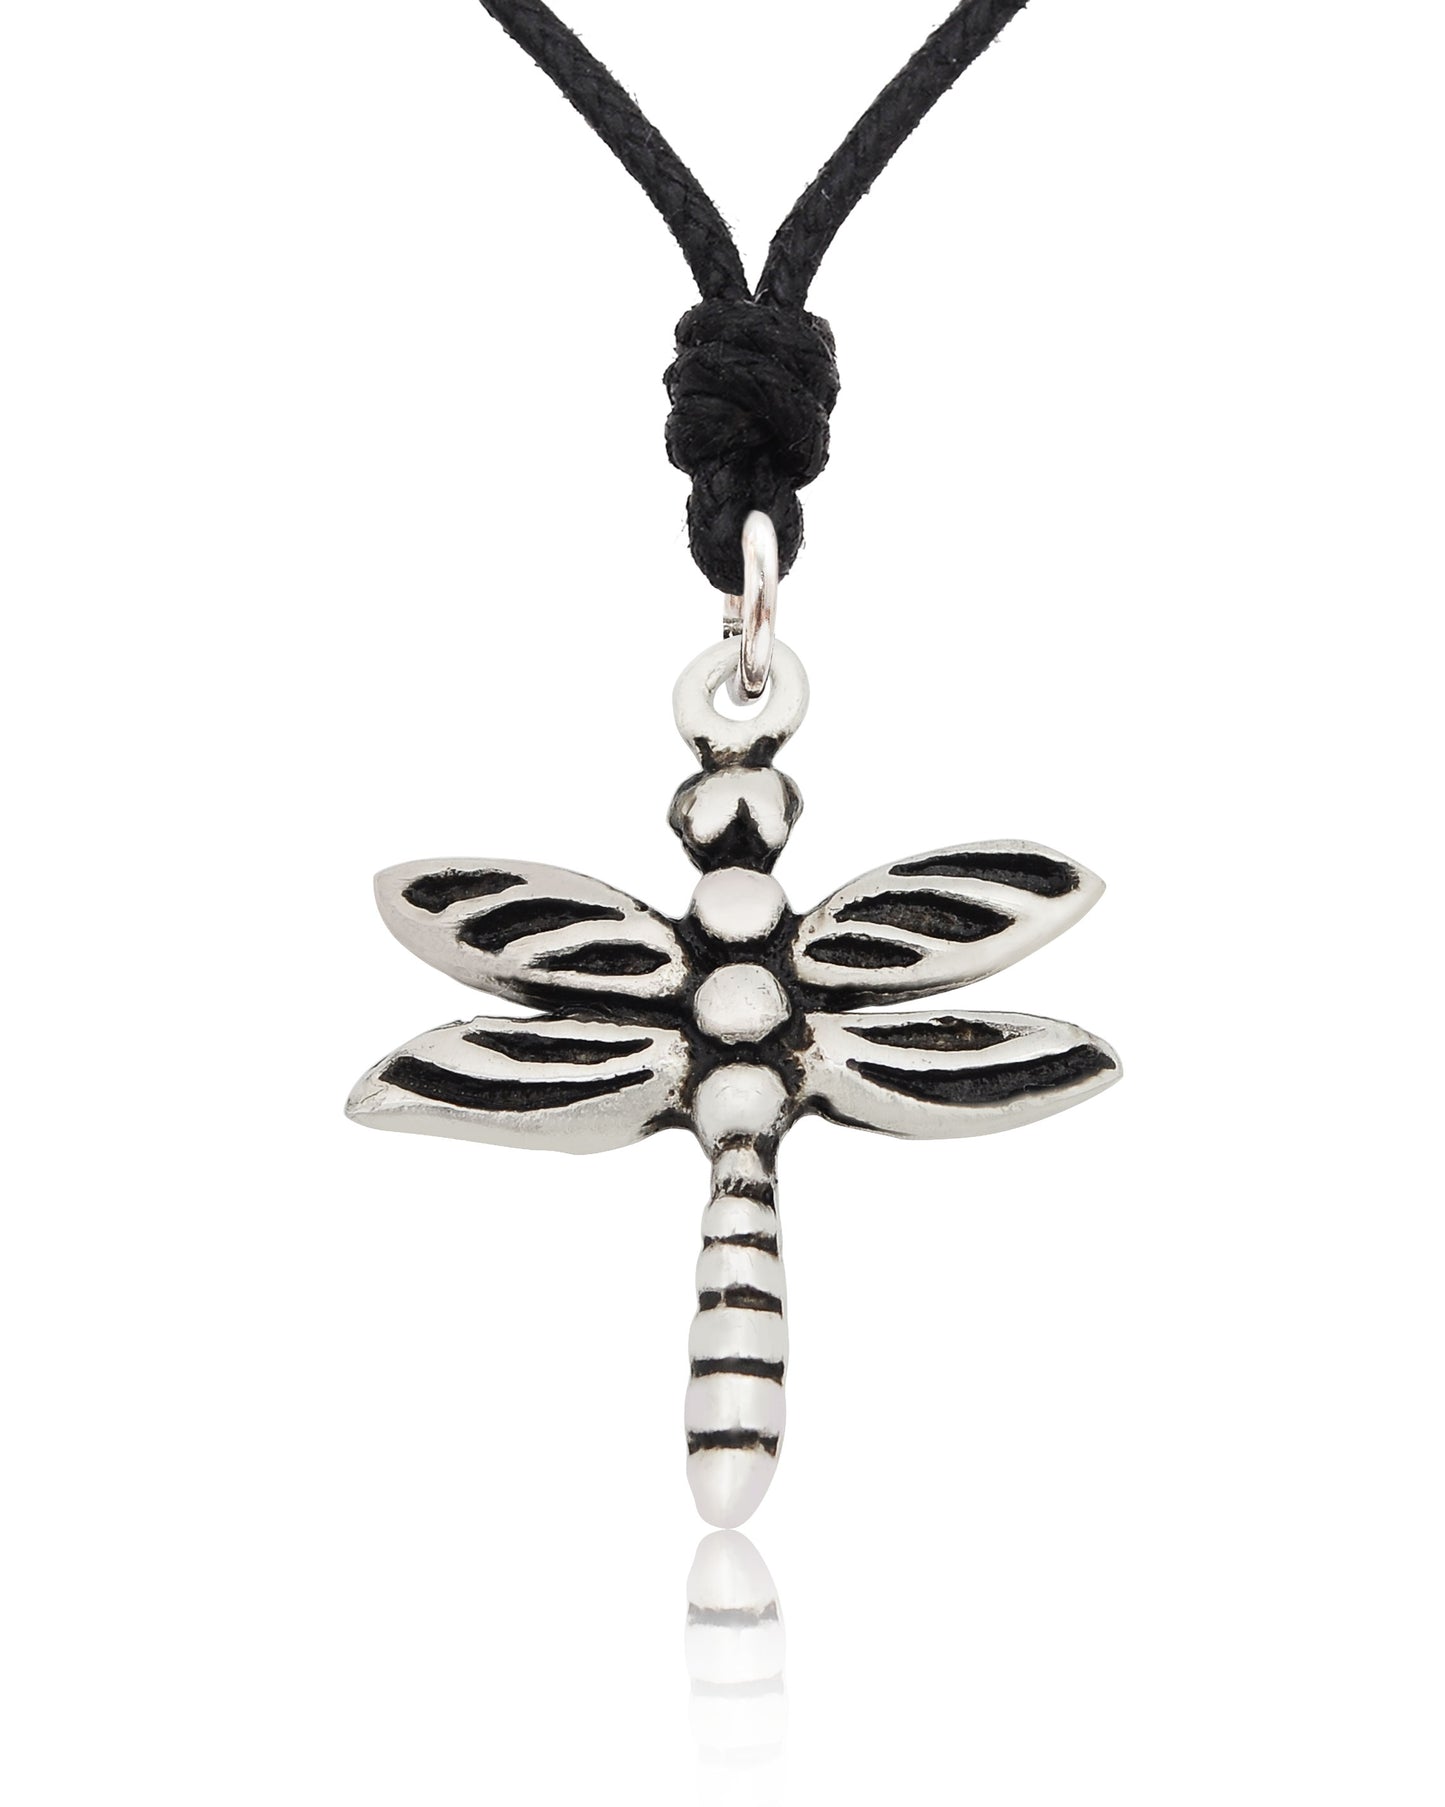 Small Dragonfly Silver Pewter Charm Necklace Pendant Jewelry With Cotton Cord